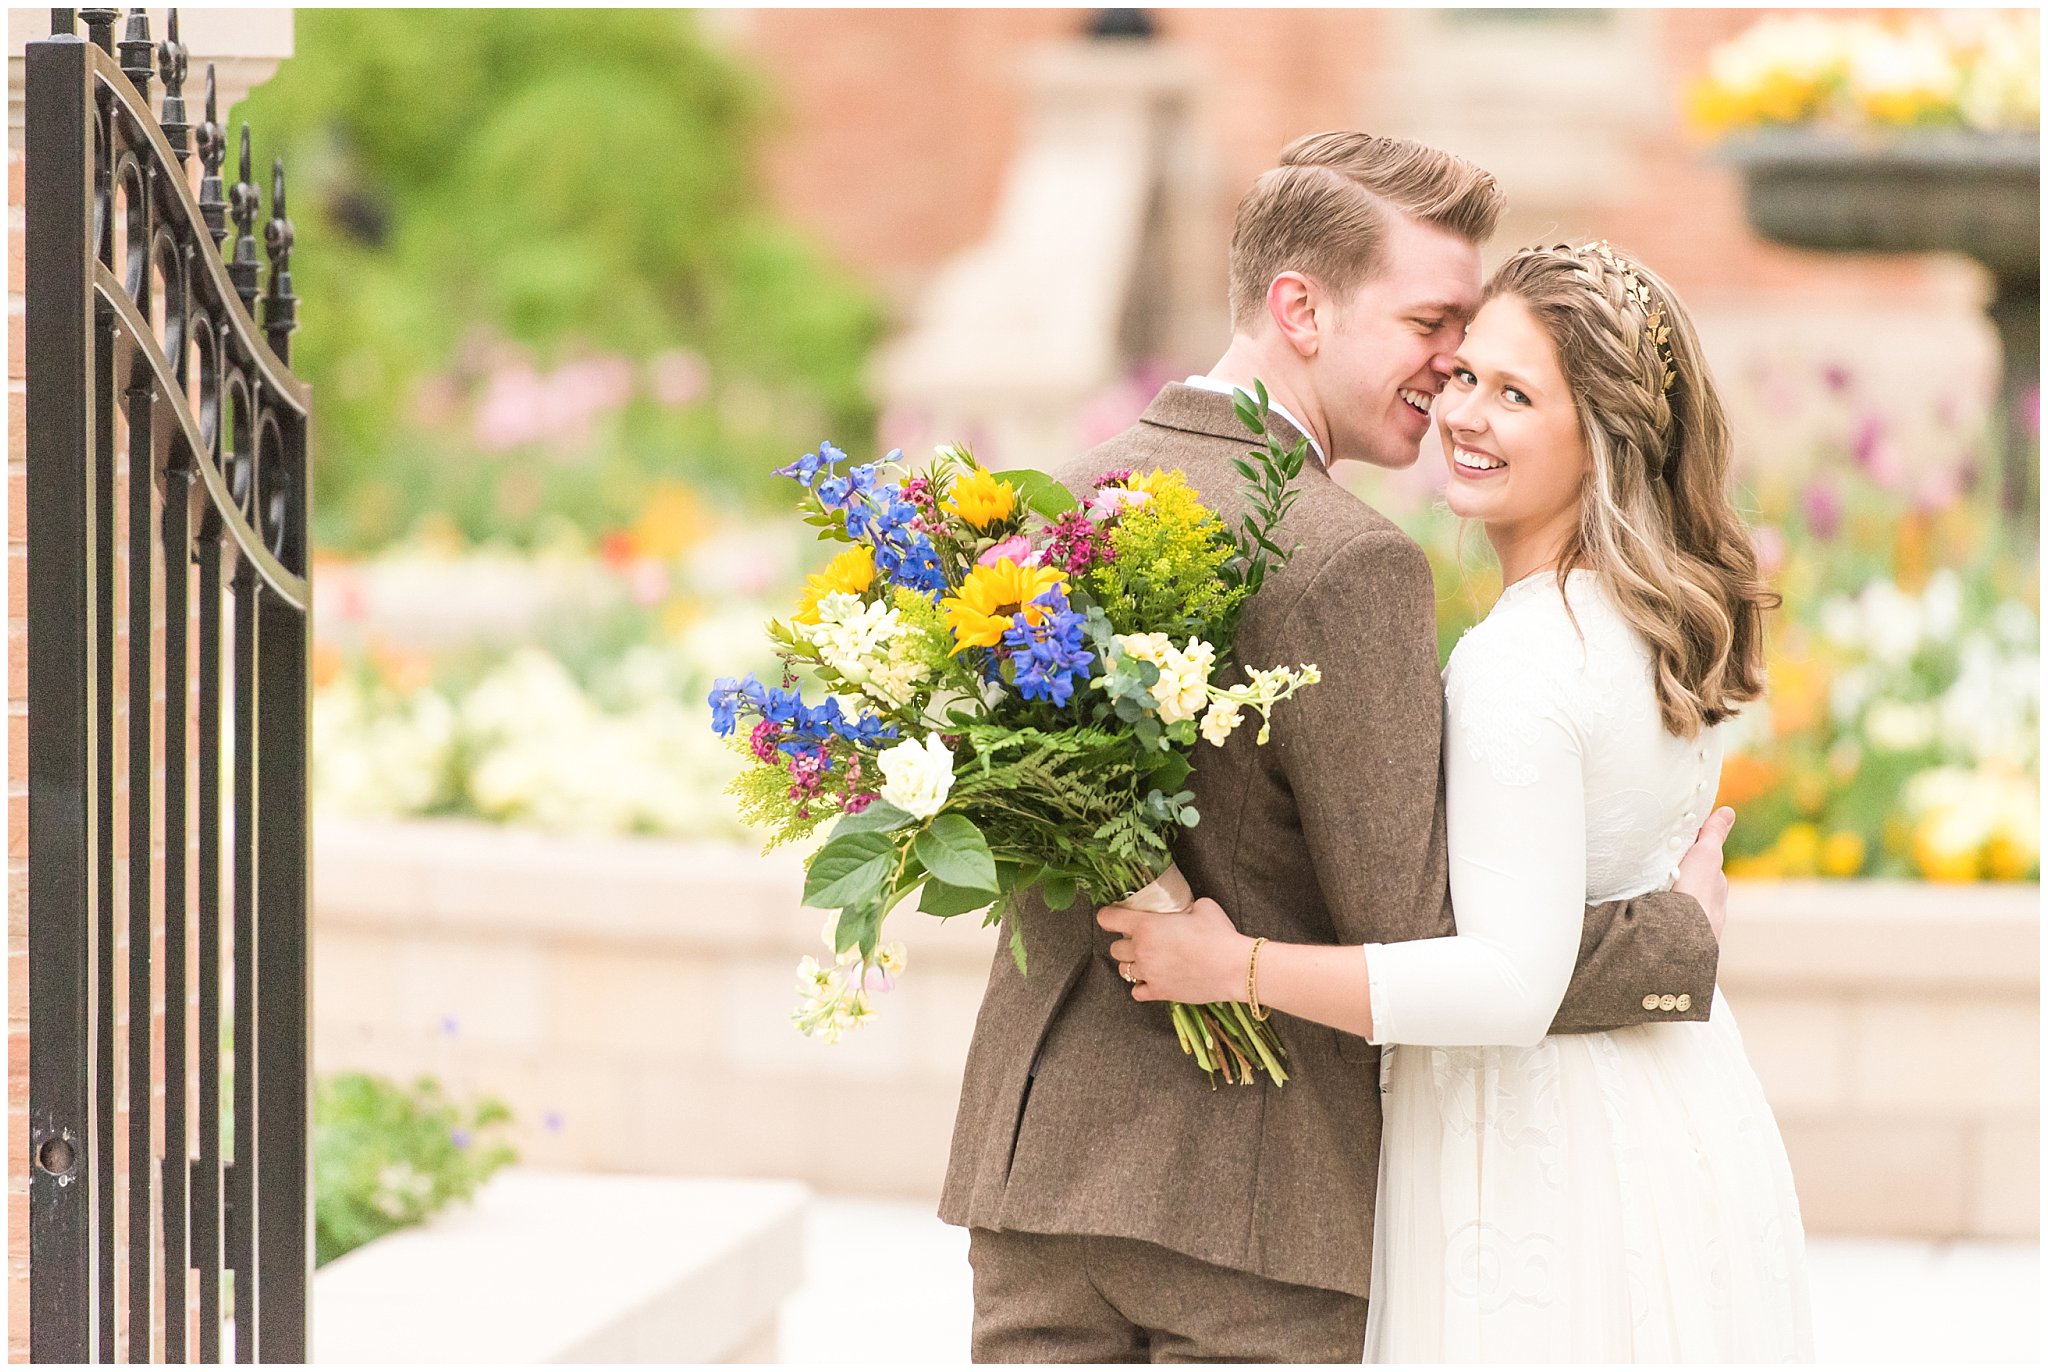 Bride and groom wedding portraits at the Provo City Center Temple | Top Utah Wedding and Couples Photos 2019 | Jessie and Dallin Photography